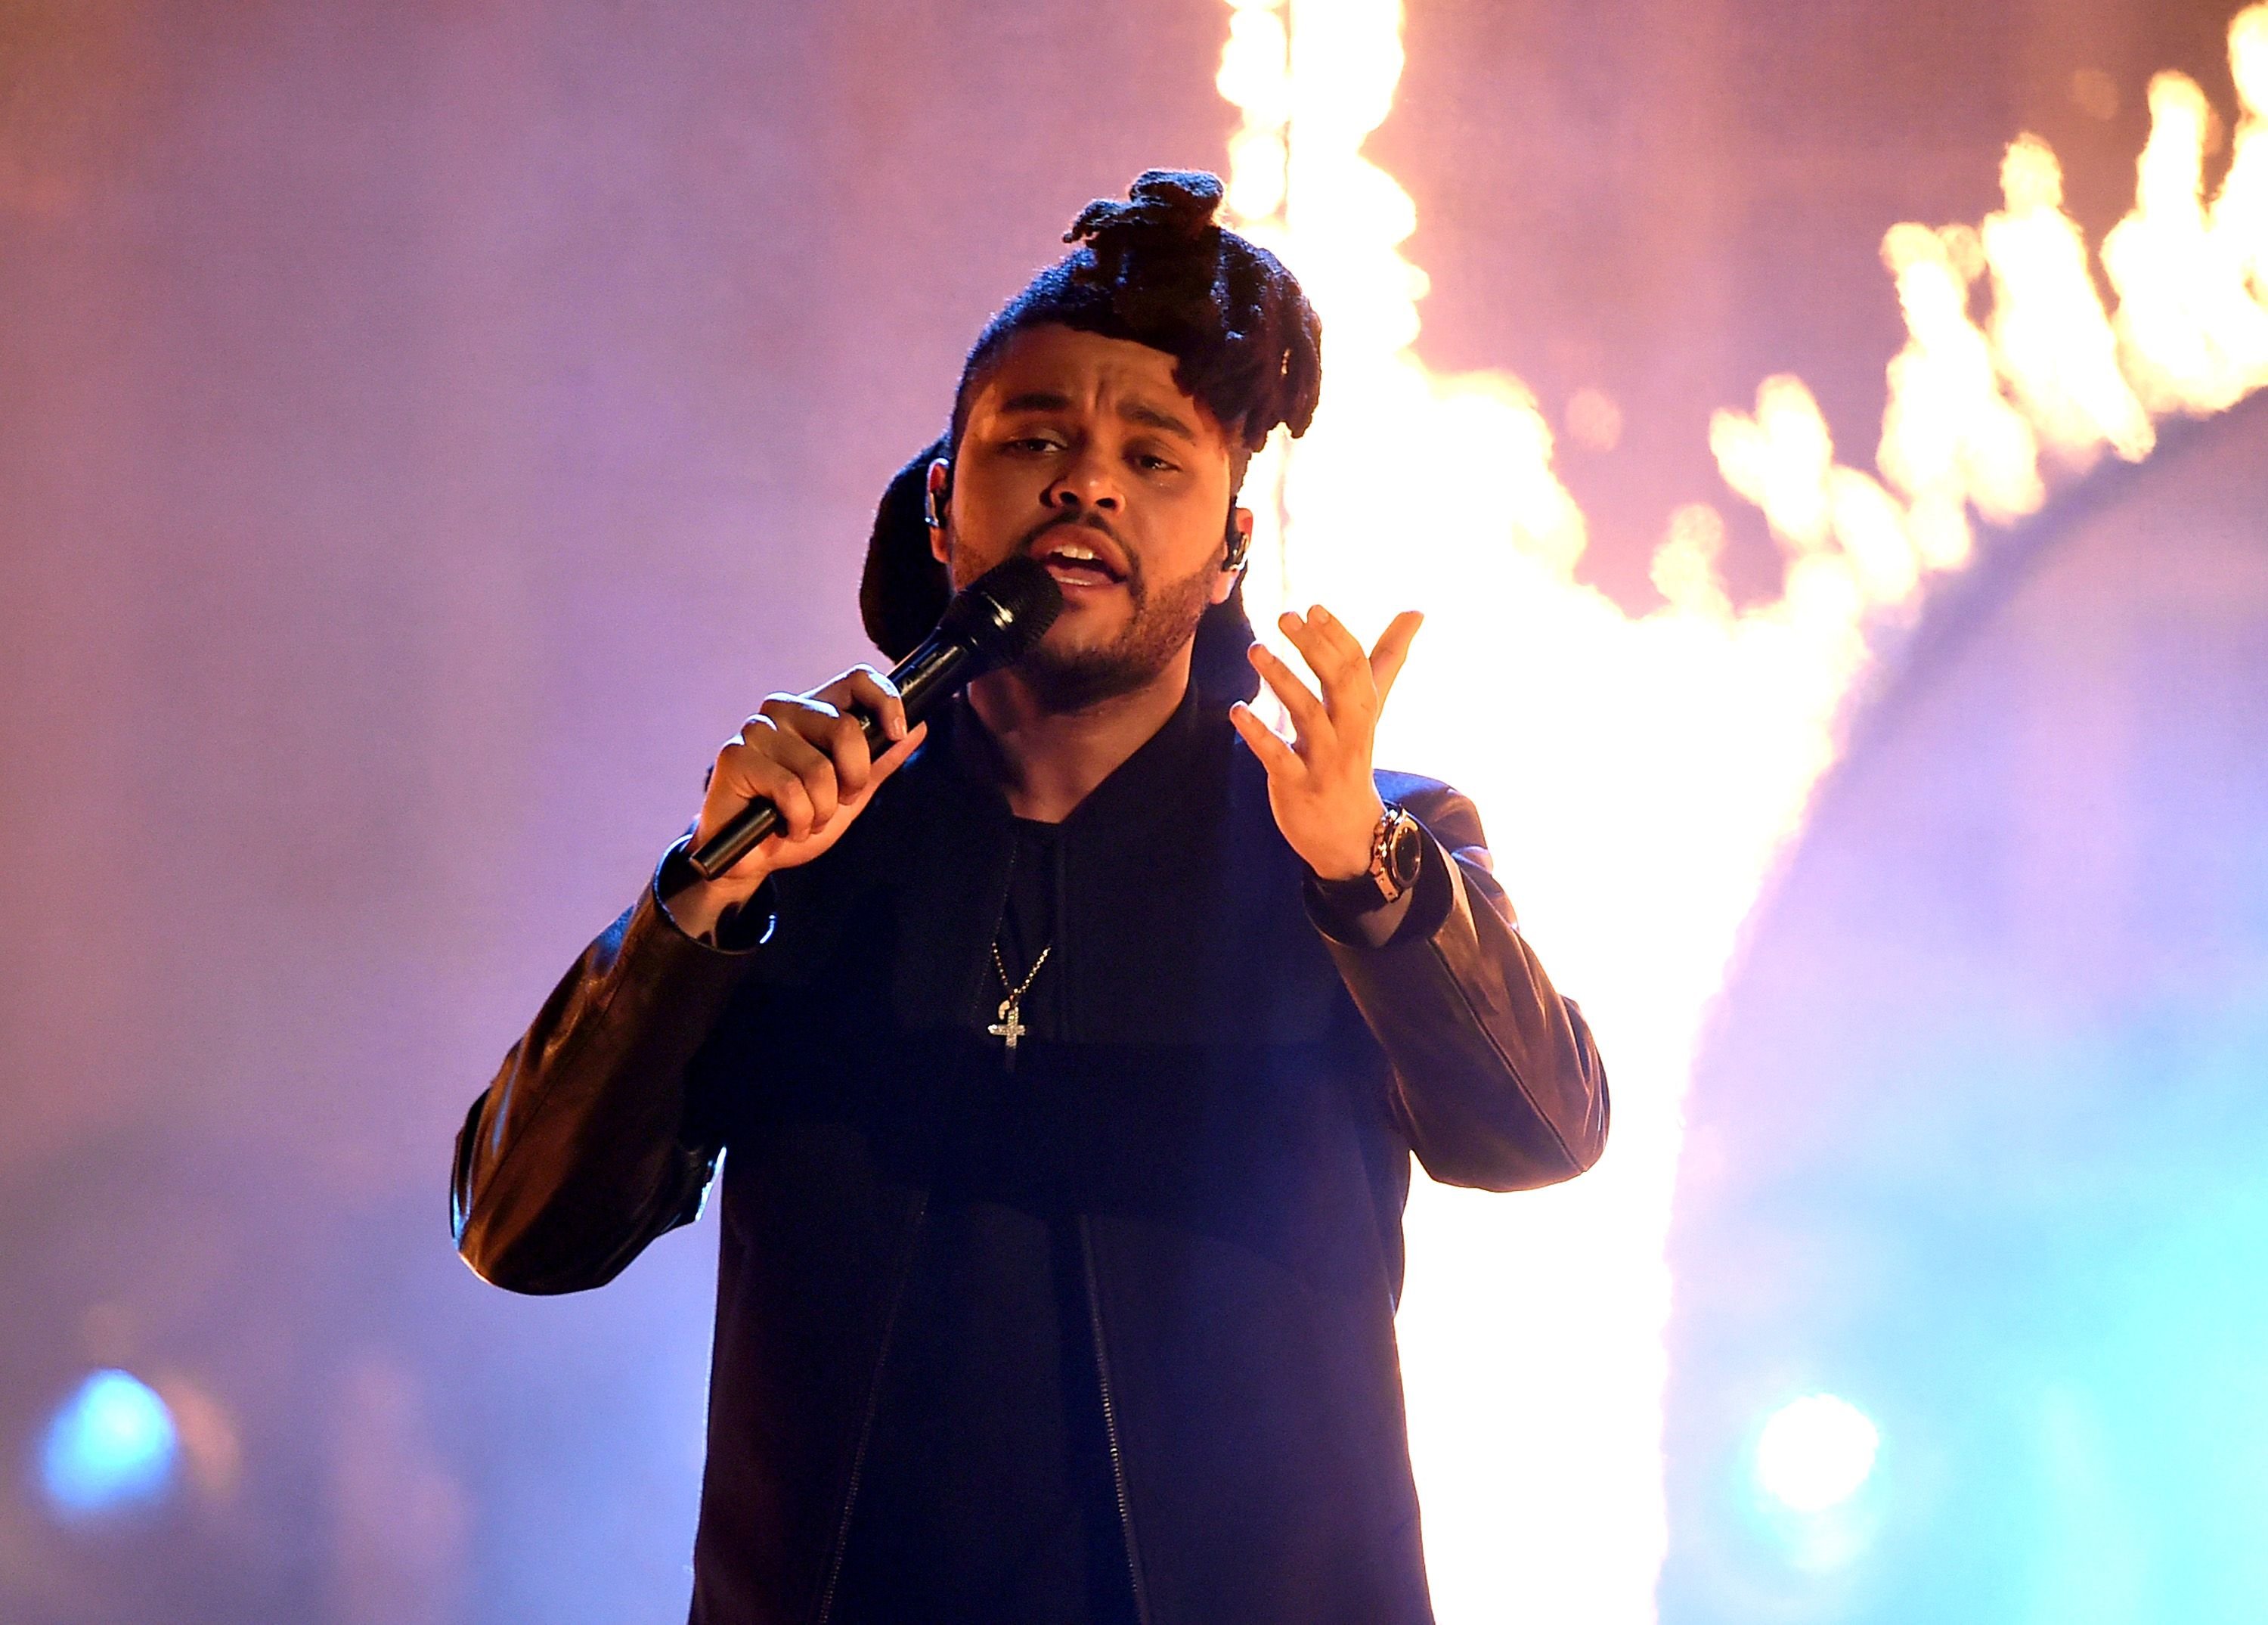 Singer The Weeknd performs onstage during the 2015 American Music Awards at Microsoft Theater on November 22, 2015 in Los Angeles, California. | Photo: Getty Images